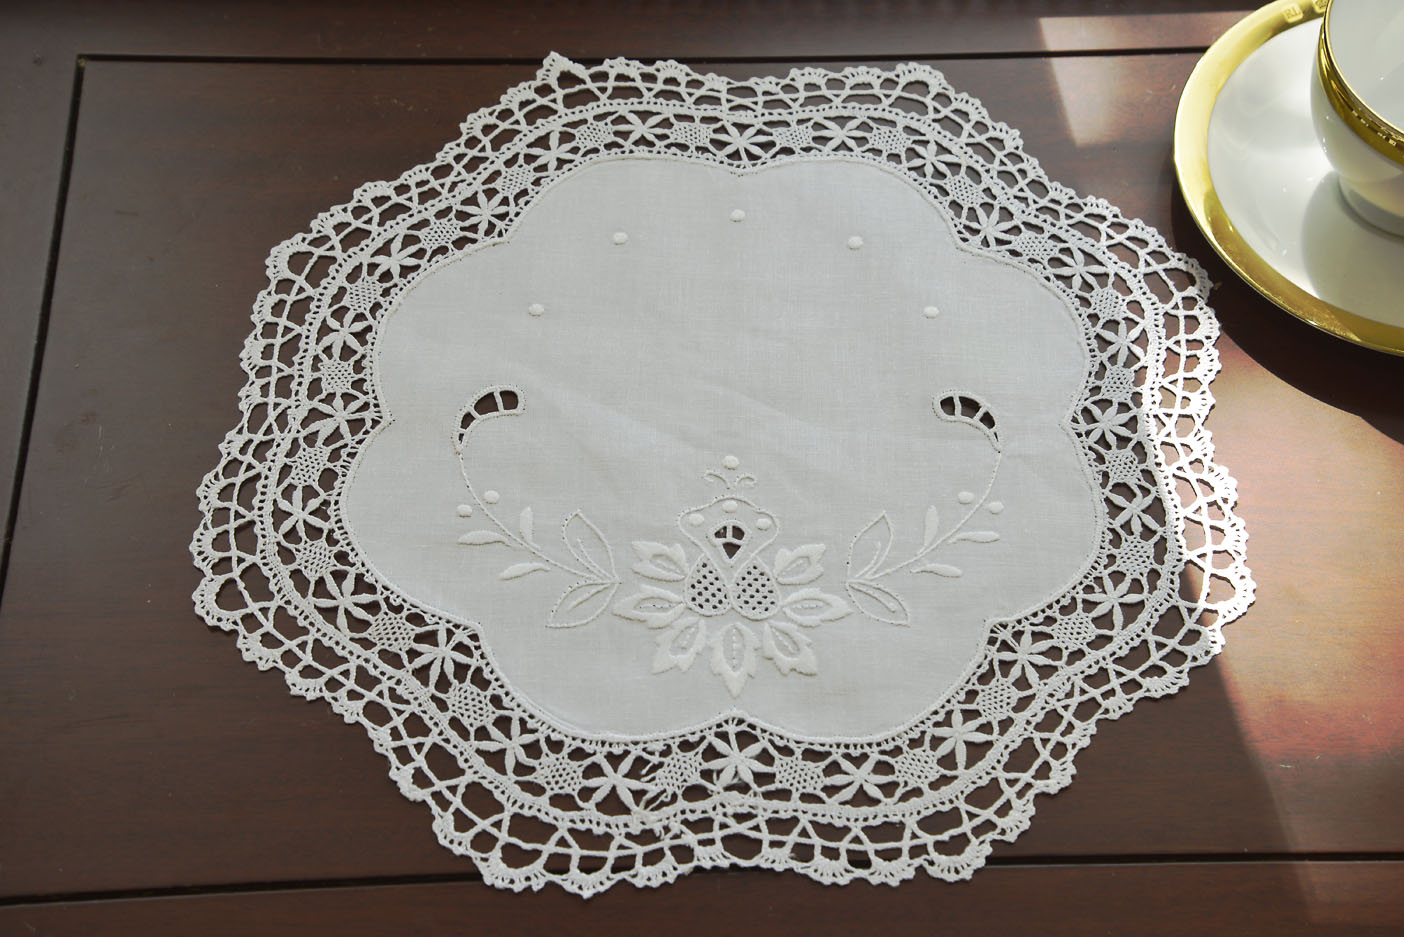 13" round, heirloom cluny lace